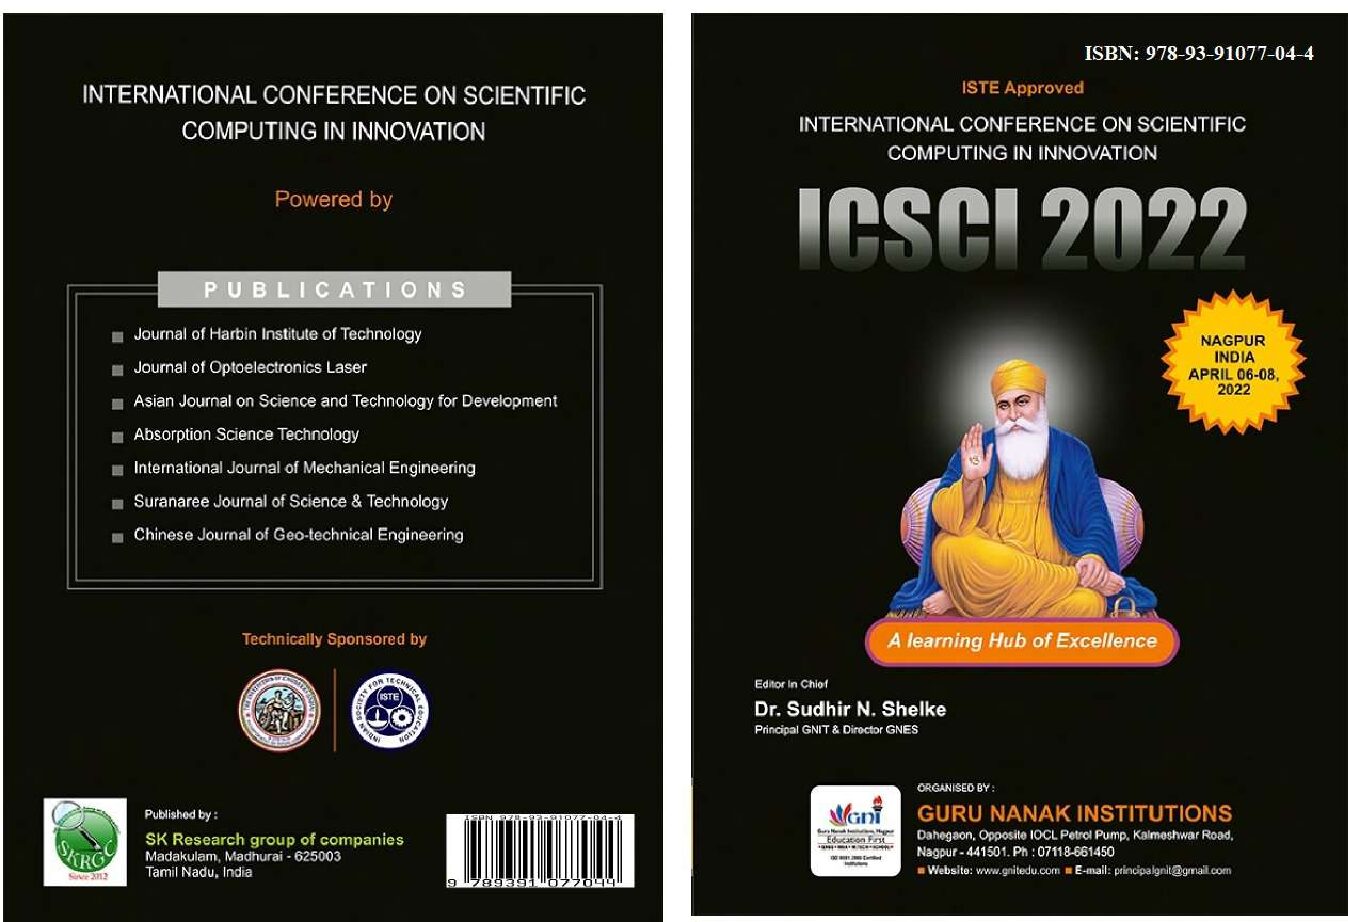 International Conference on Scientific Computing in Innovation, Jointly Organising, ISTE Approved. In Collaboration with The Institutions of Engineers (India) (NLC) (ICSCI-2022) 6th – 8th April 2022 (Hybrid Mode). Guru Nanak Institutions, Guru Nanak Institute of Technology and Guru Nanak Institute of Engineering and Technology, Nagpur, India.